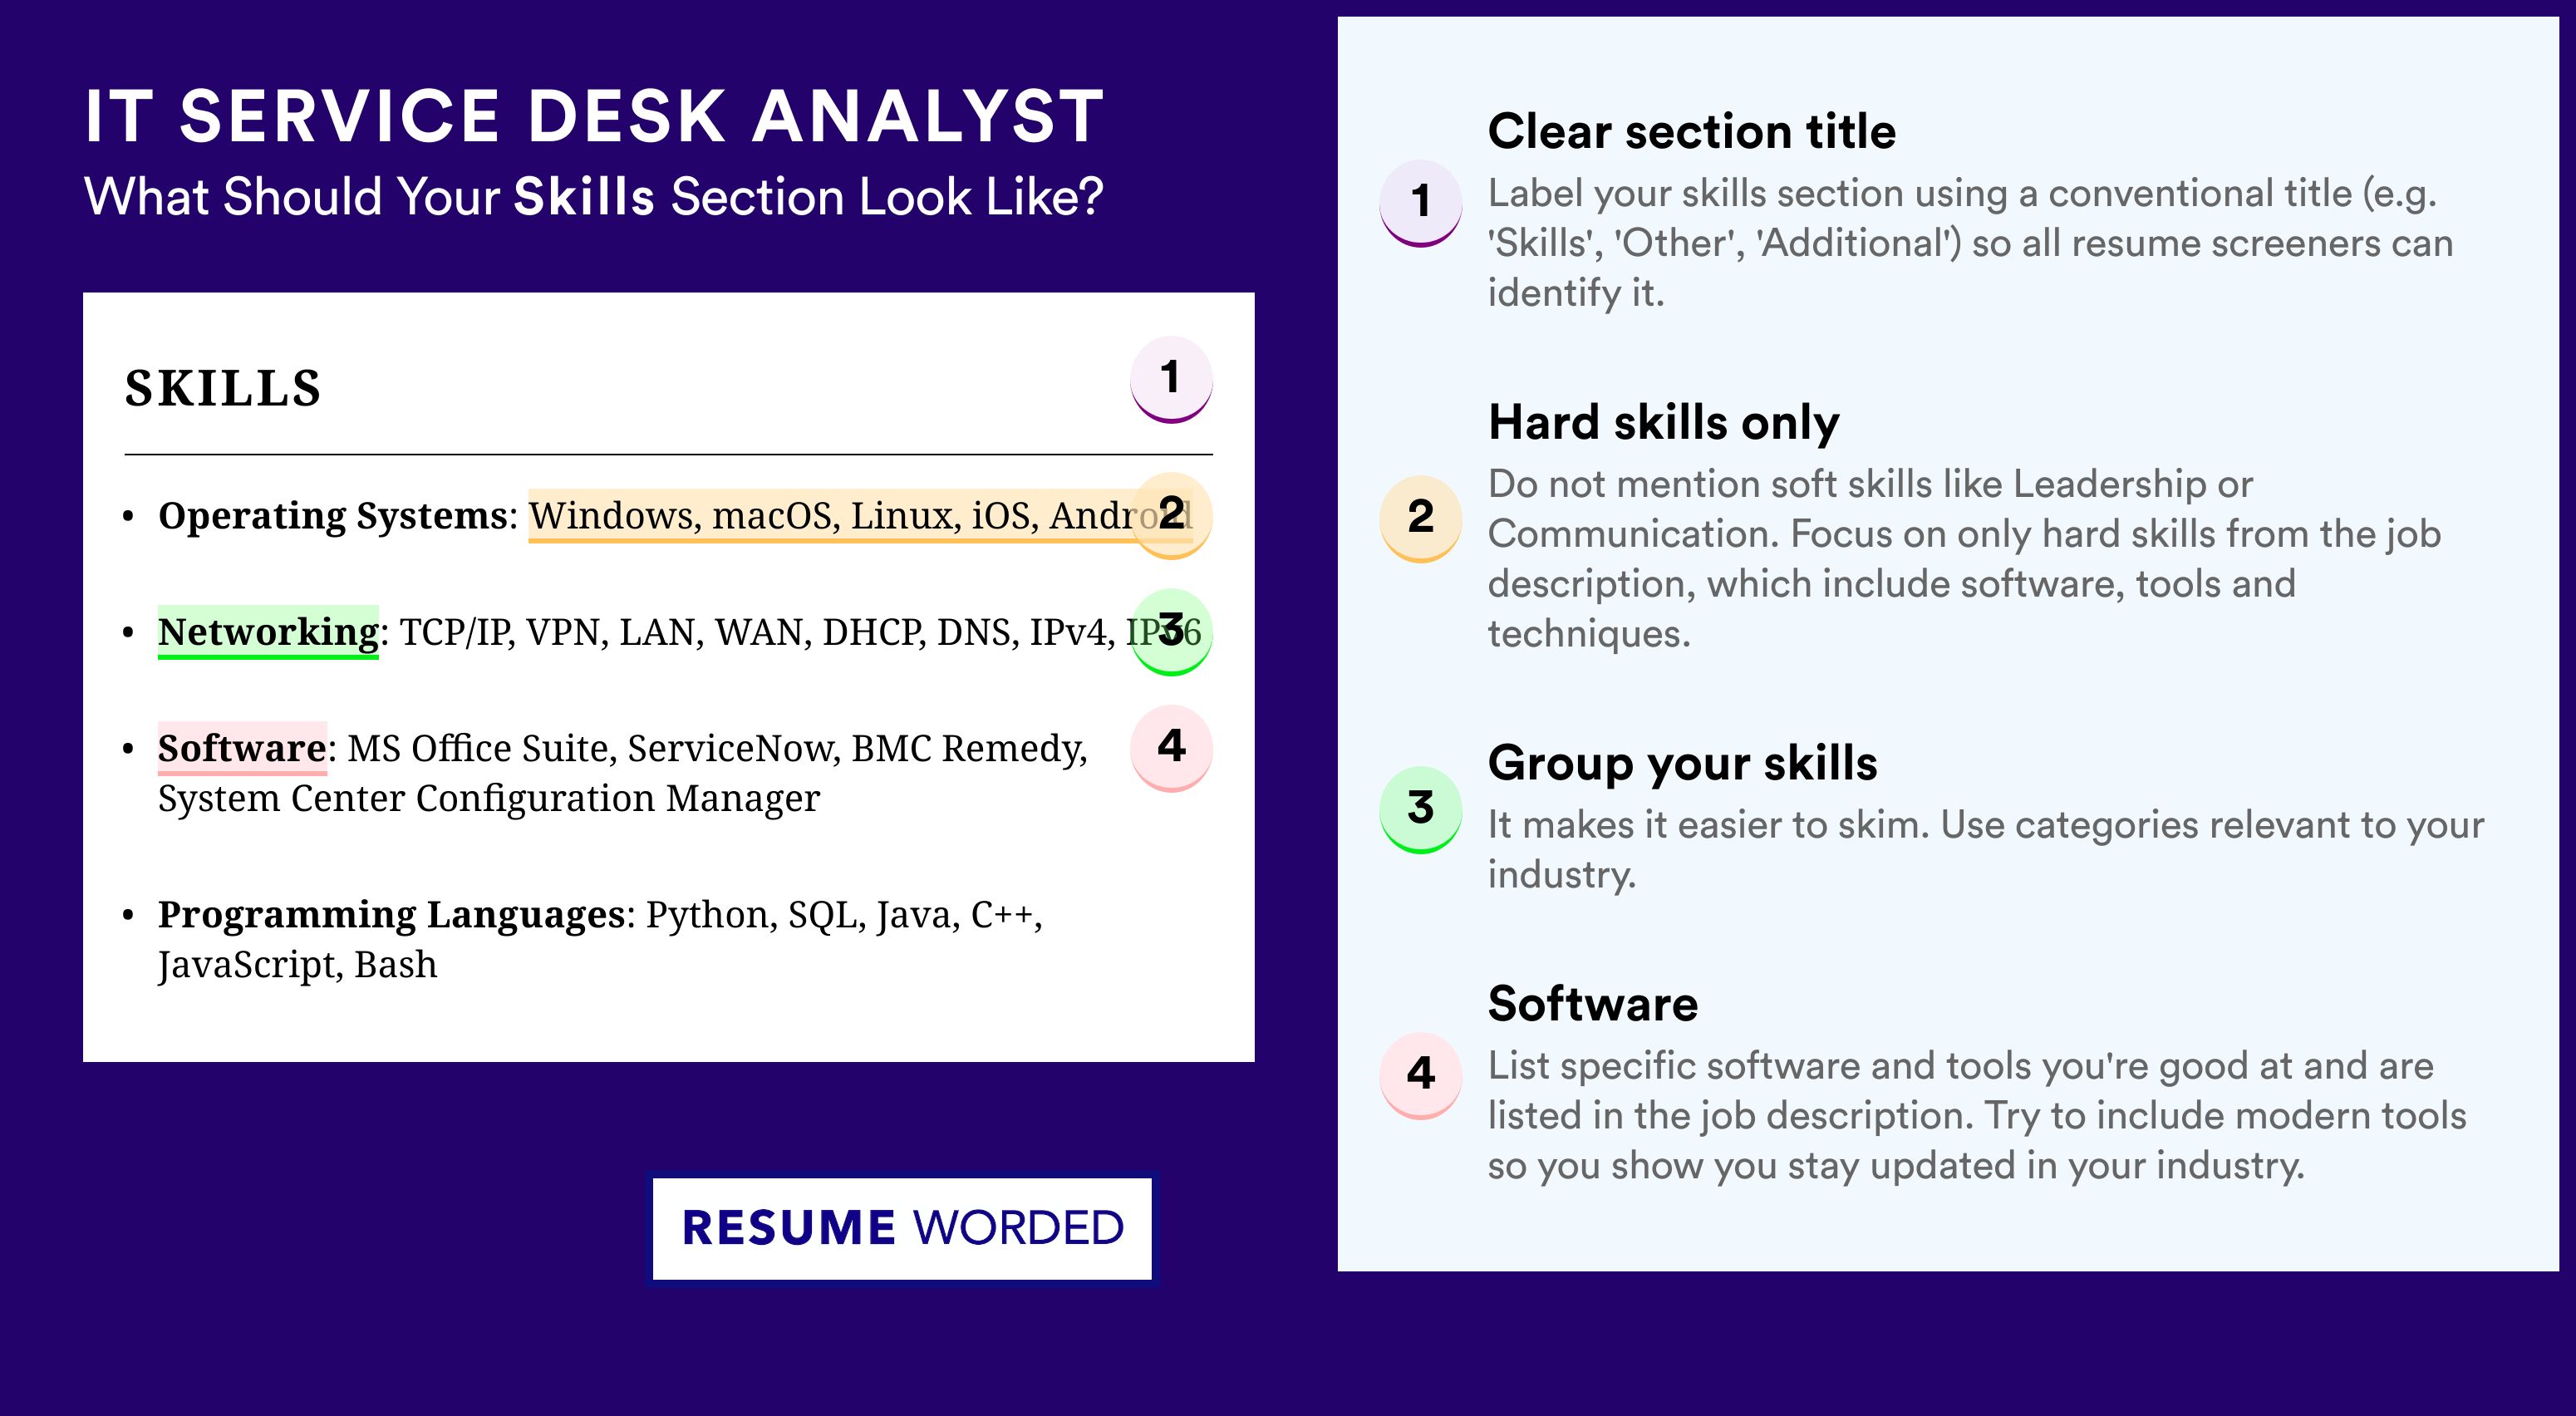 How To Write Your Skills Section - IT Service Desk Analyst Roles